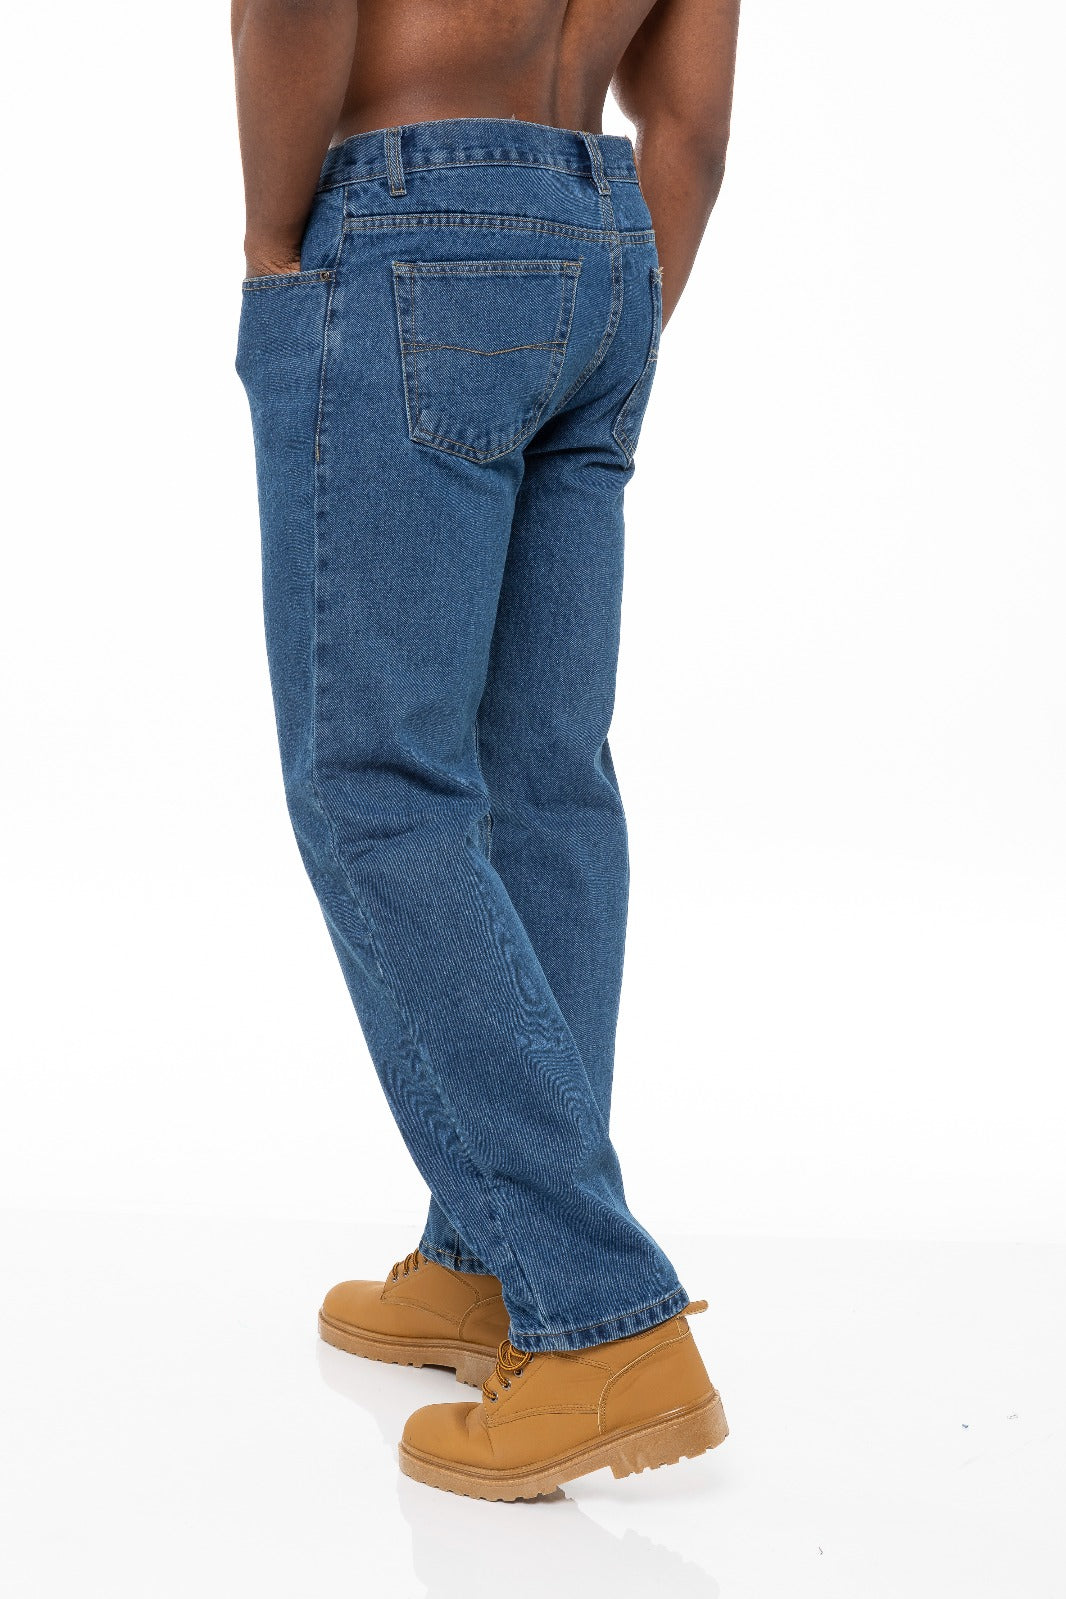 Zsolt Blue Shade Patch Mens Denim Jean at Rs 495/piece in Chennai